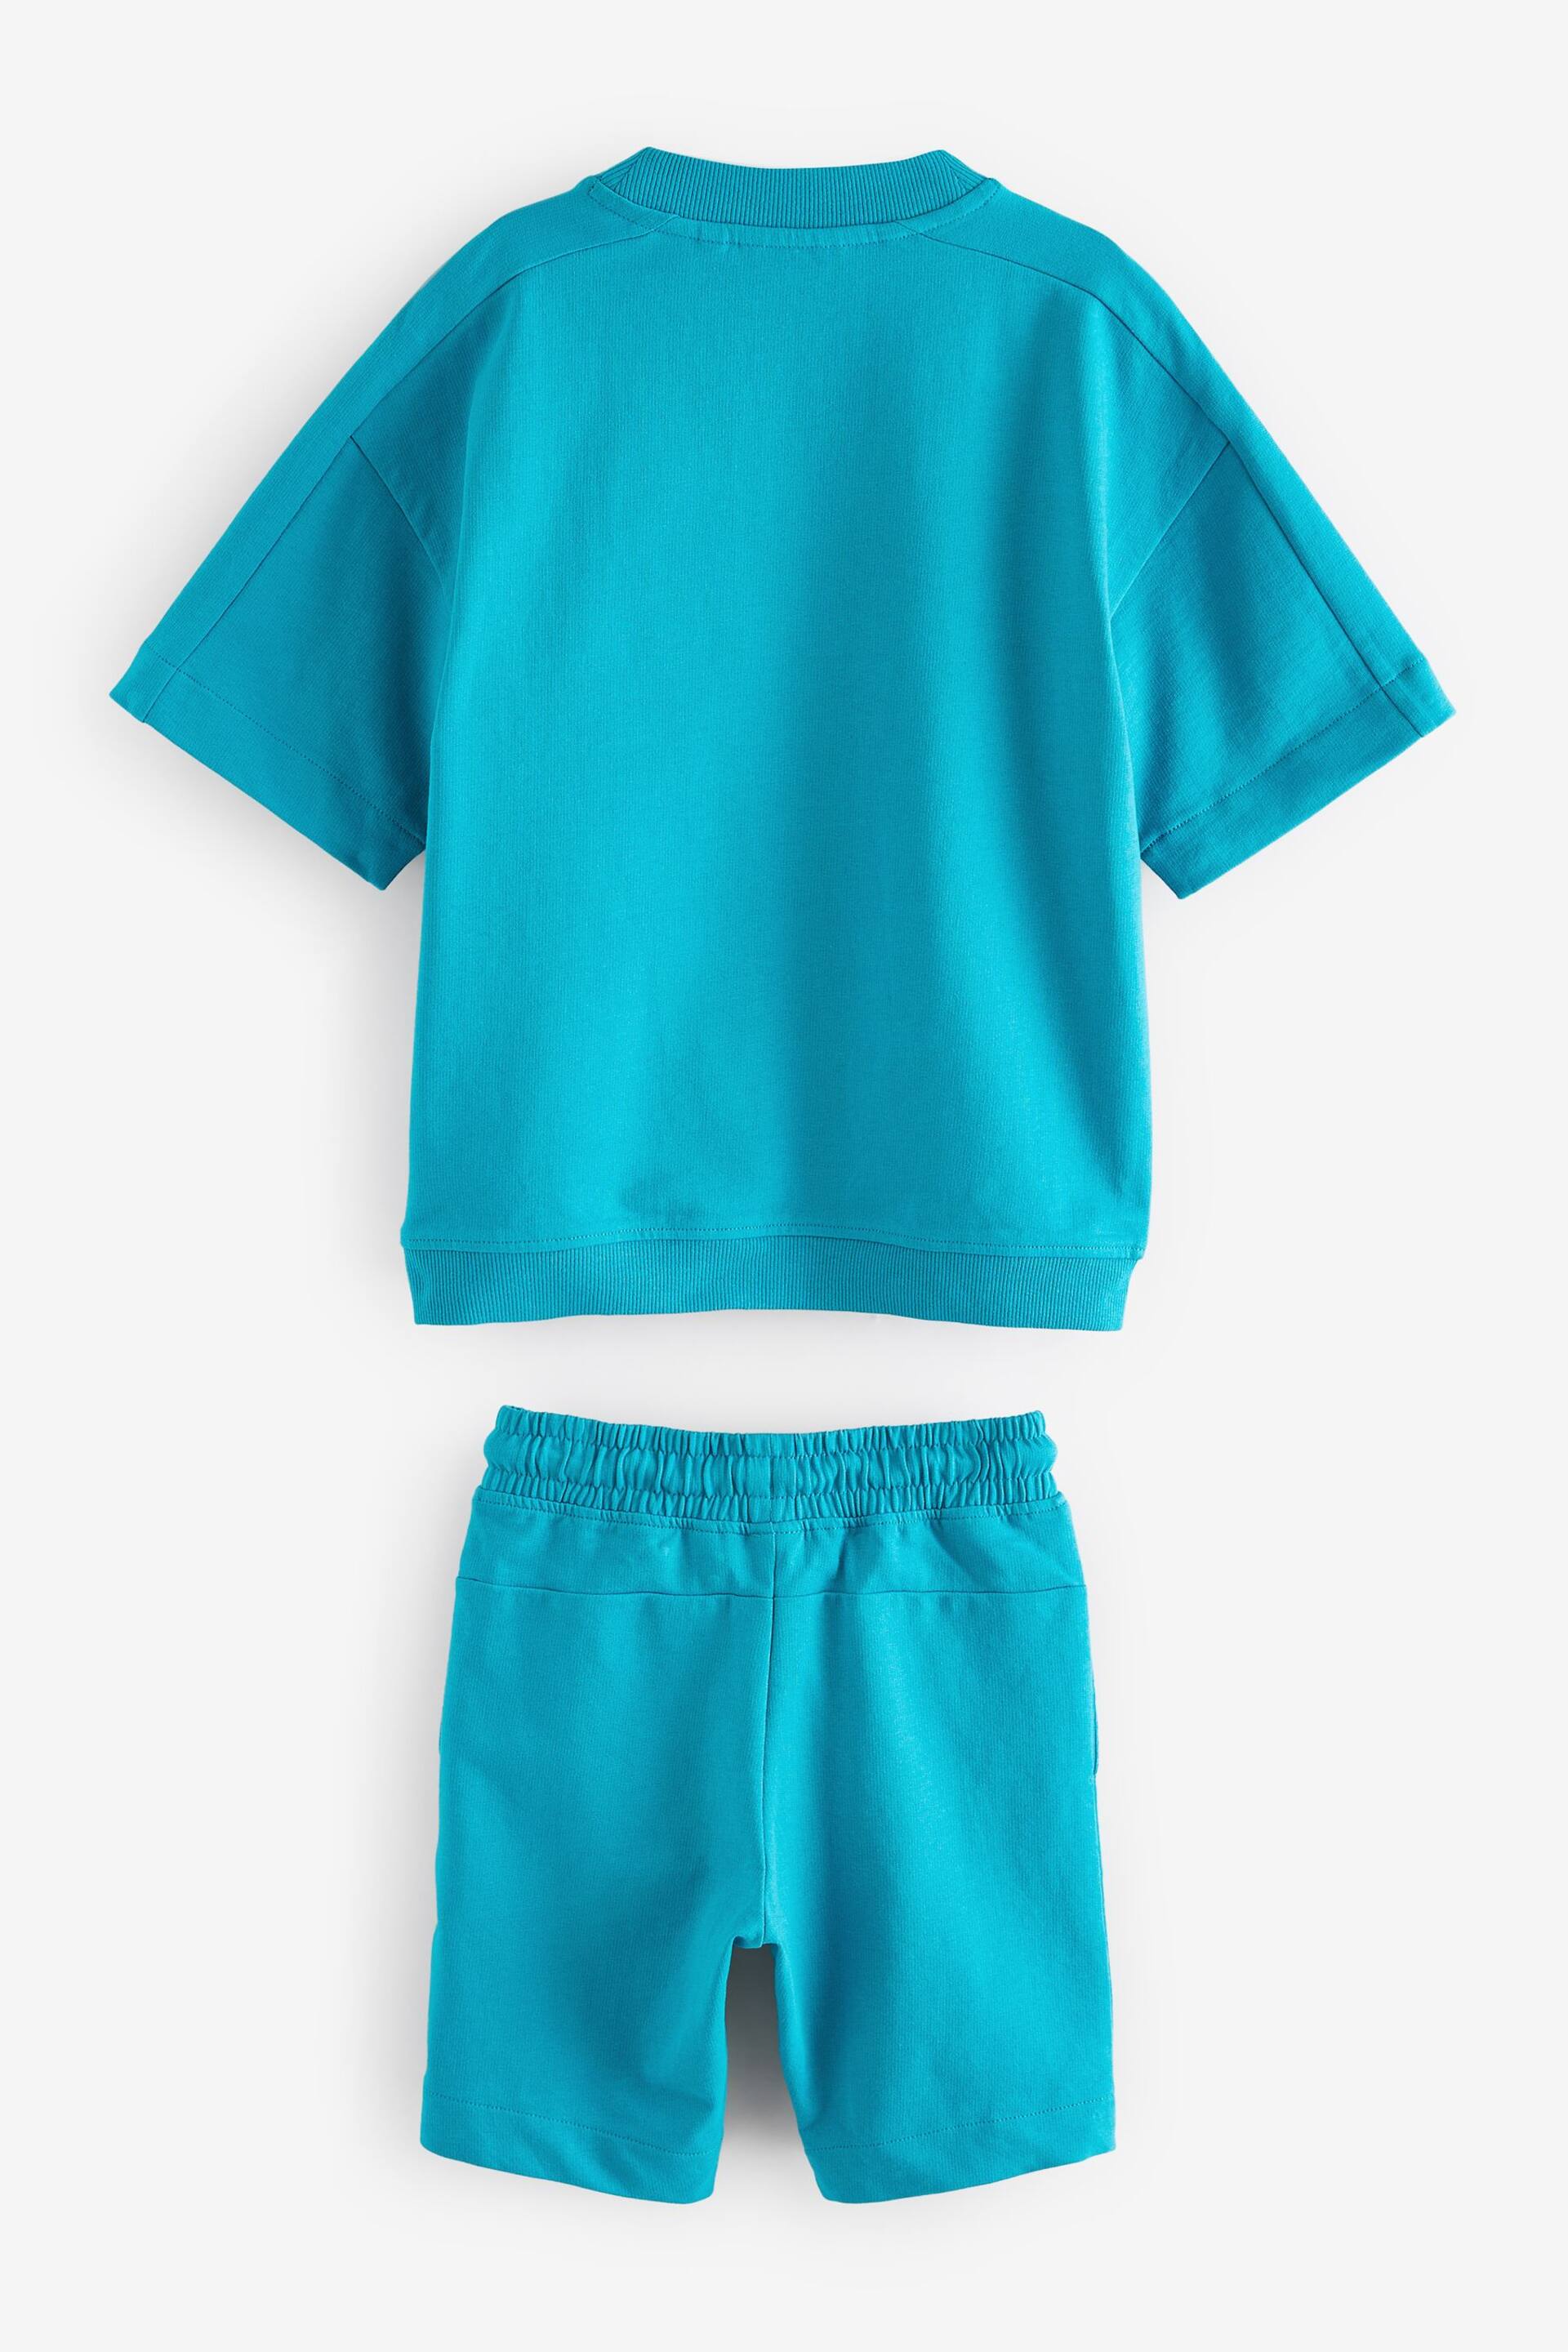 Turquoise Blue Midweight Short Sleeve Crew T-Shirt and Shorts Set (3-16yrs) - Image 2 of 4